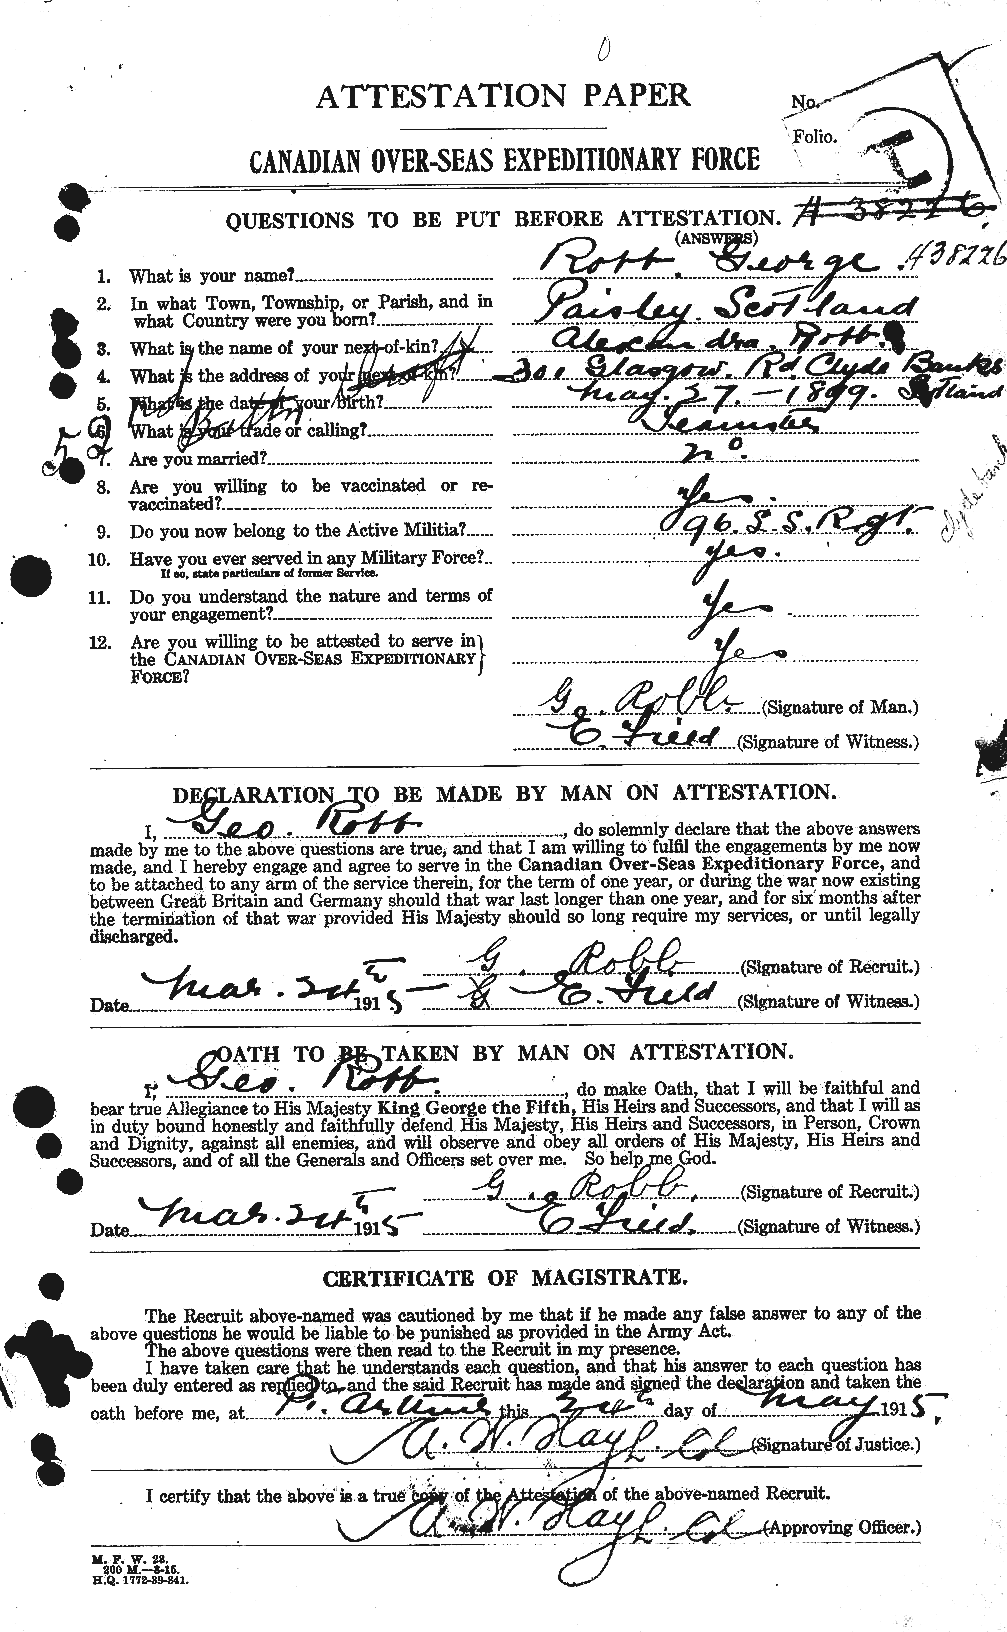 Personnel Records of the First World War - CEF 603686a